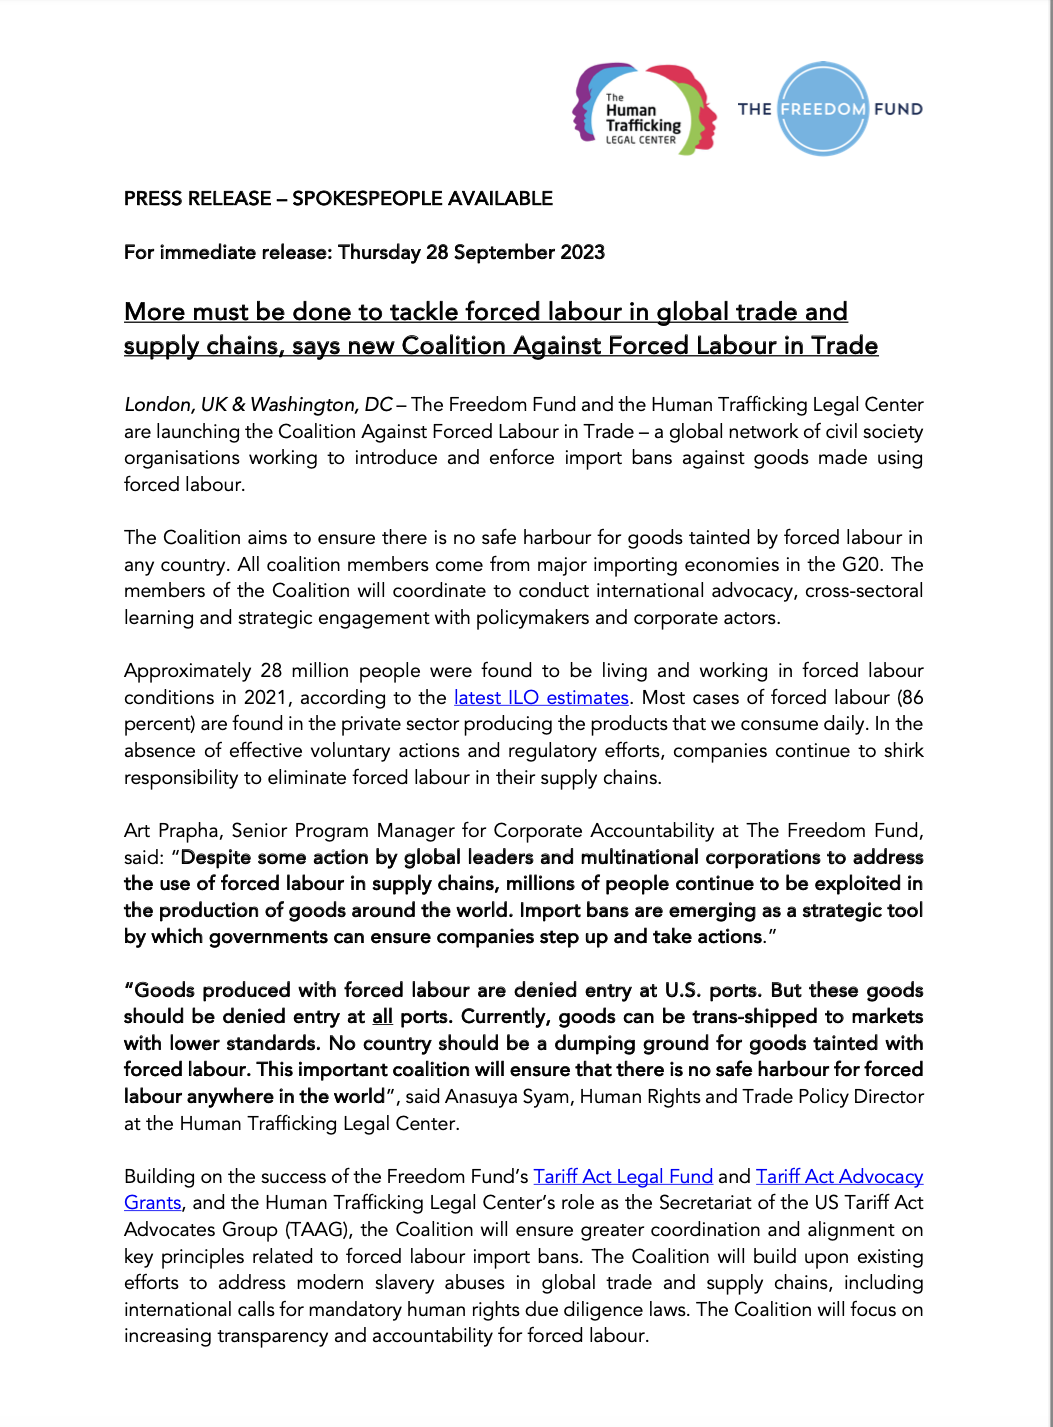 9.28.23 Global Coalition Formed to Combat Forced Labor in Trade Supply Chains